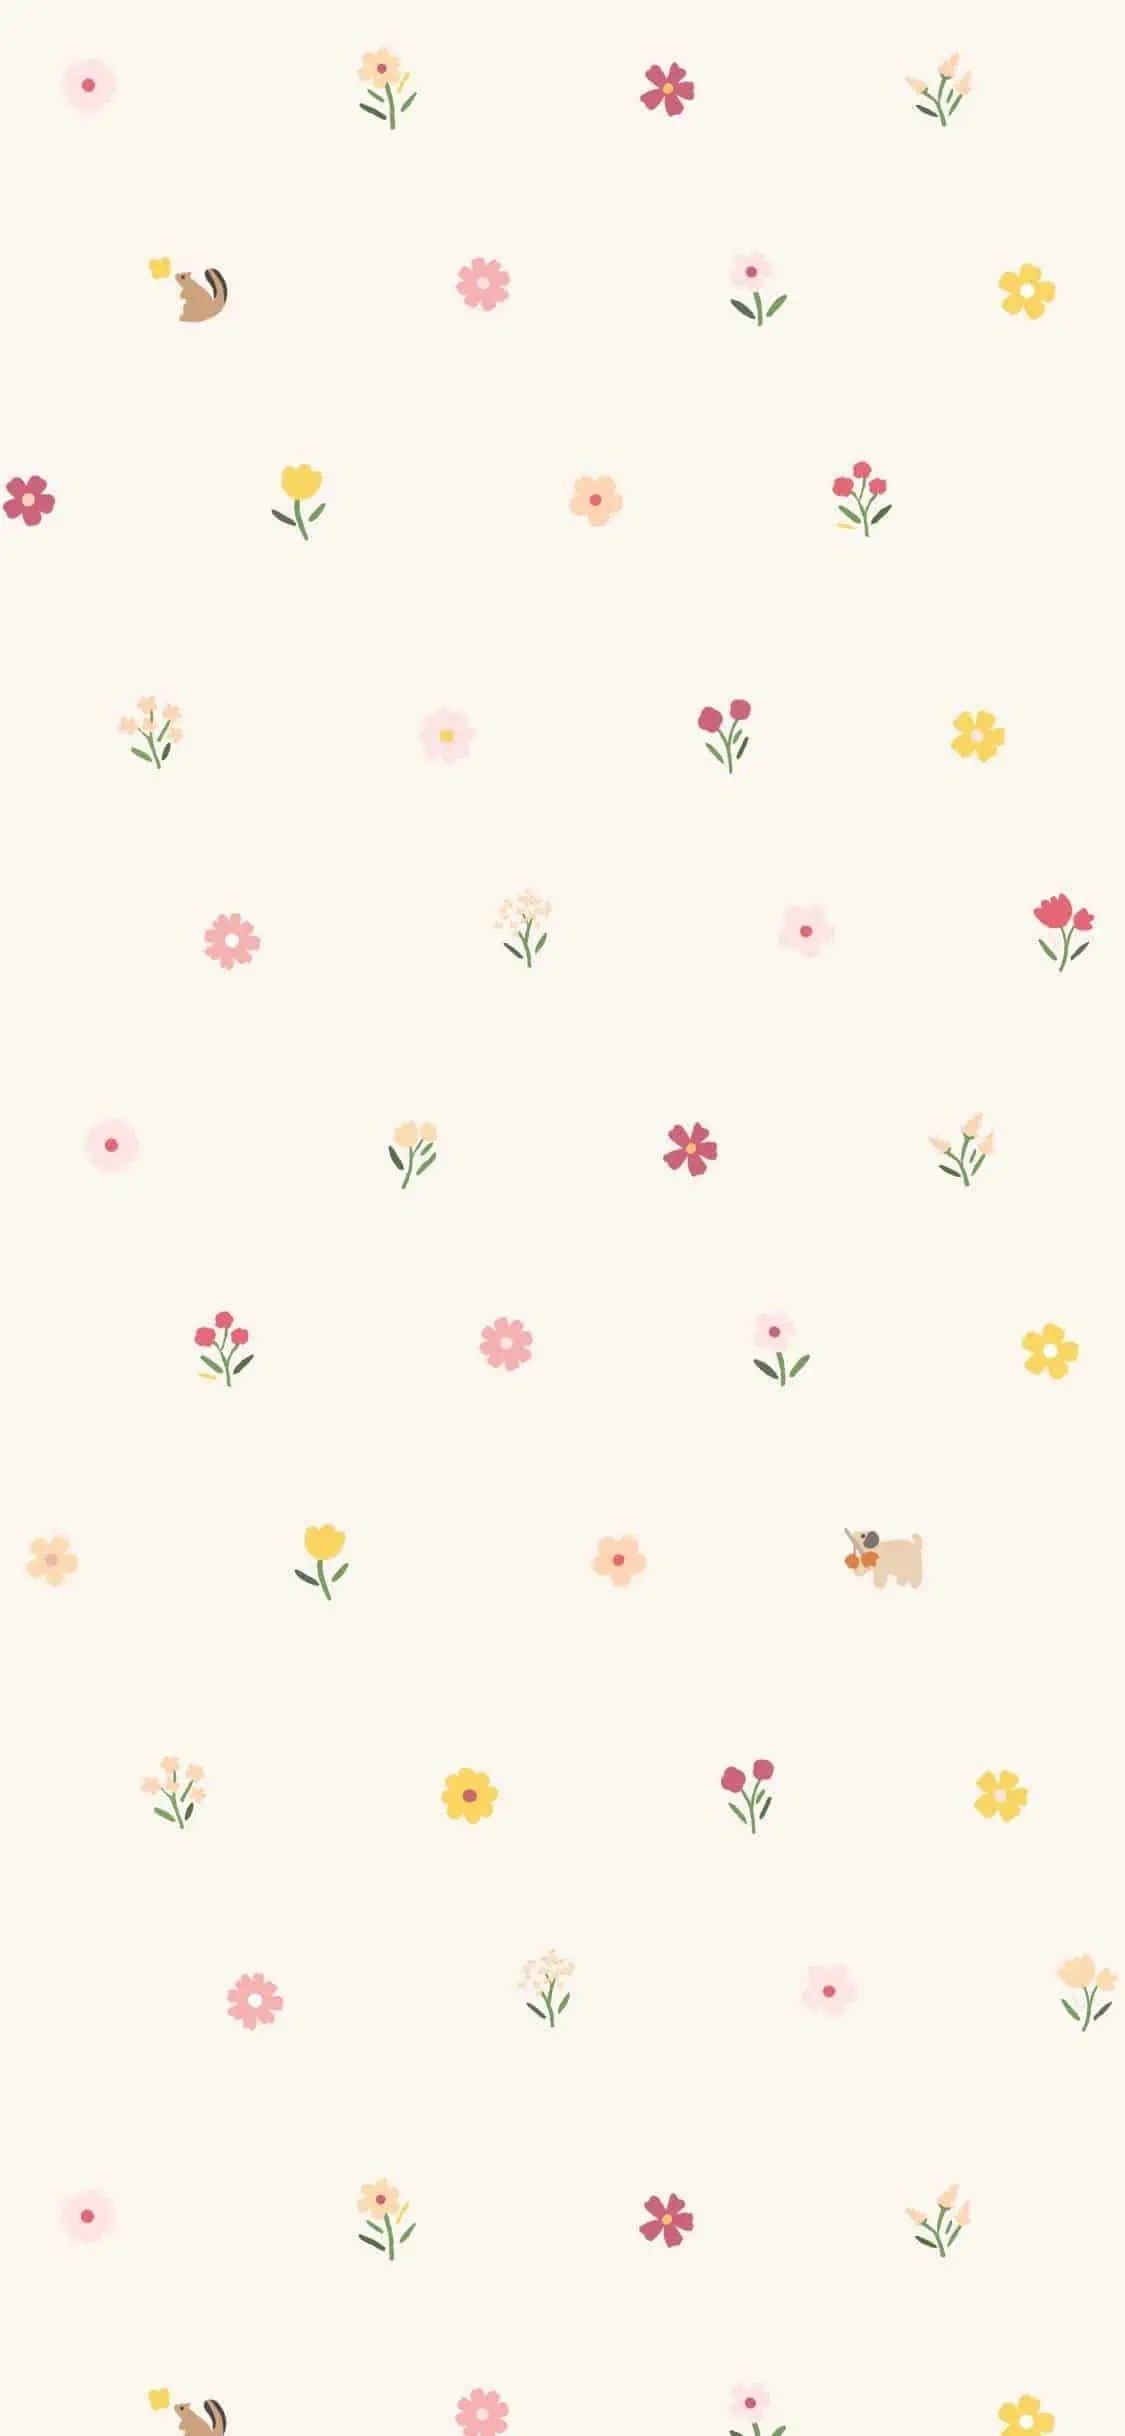 Small flowers and animals on a white background - Cute iPhone, pattern